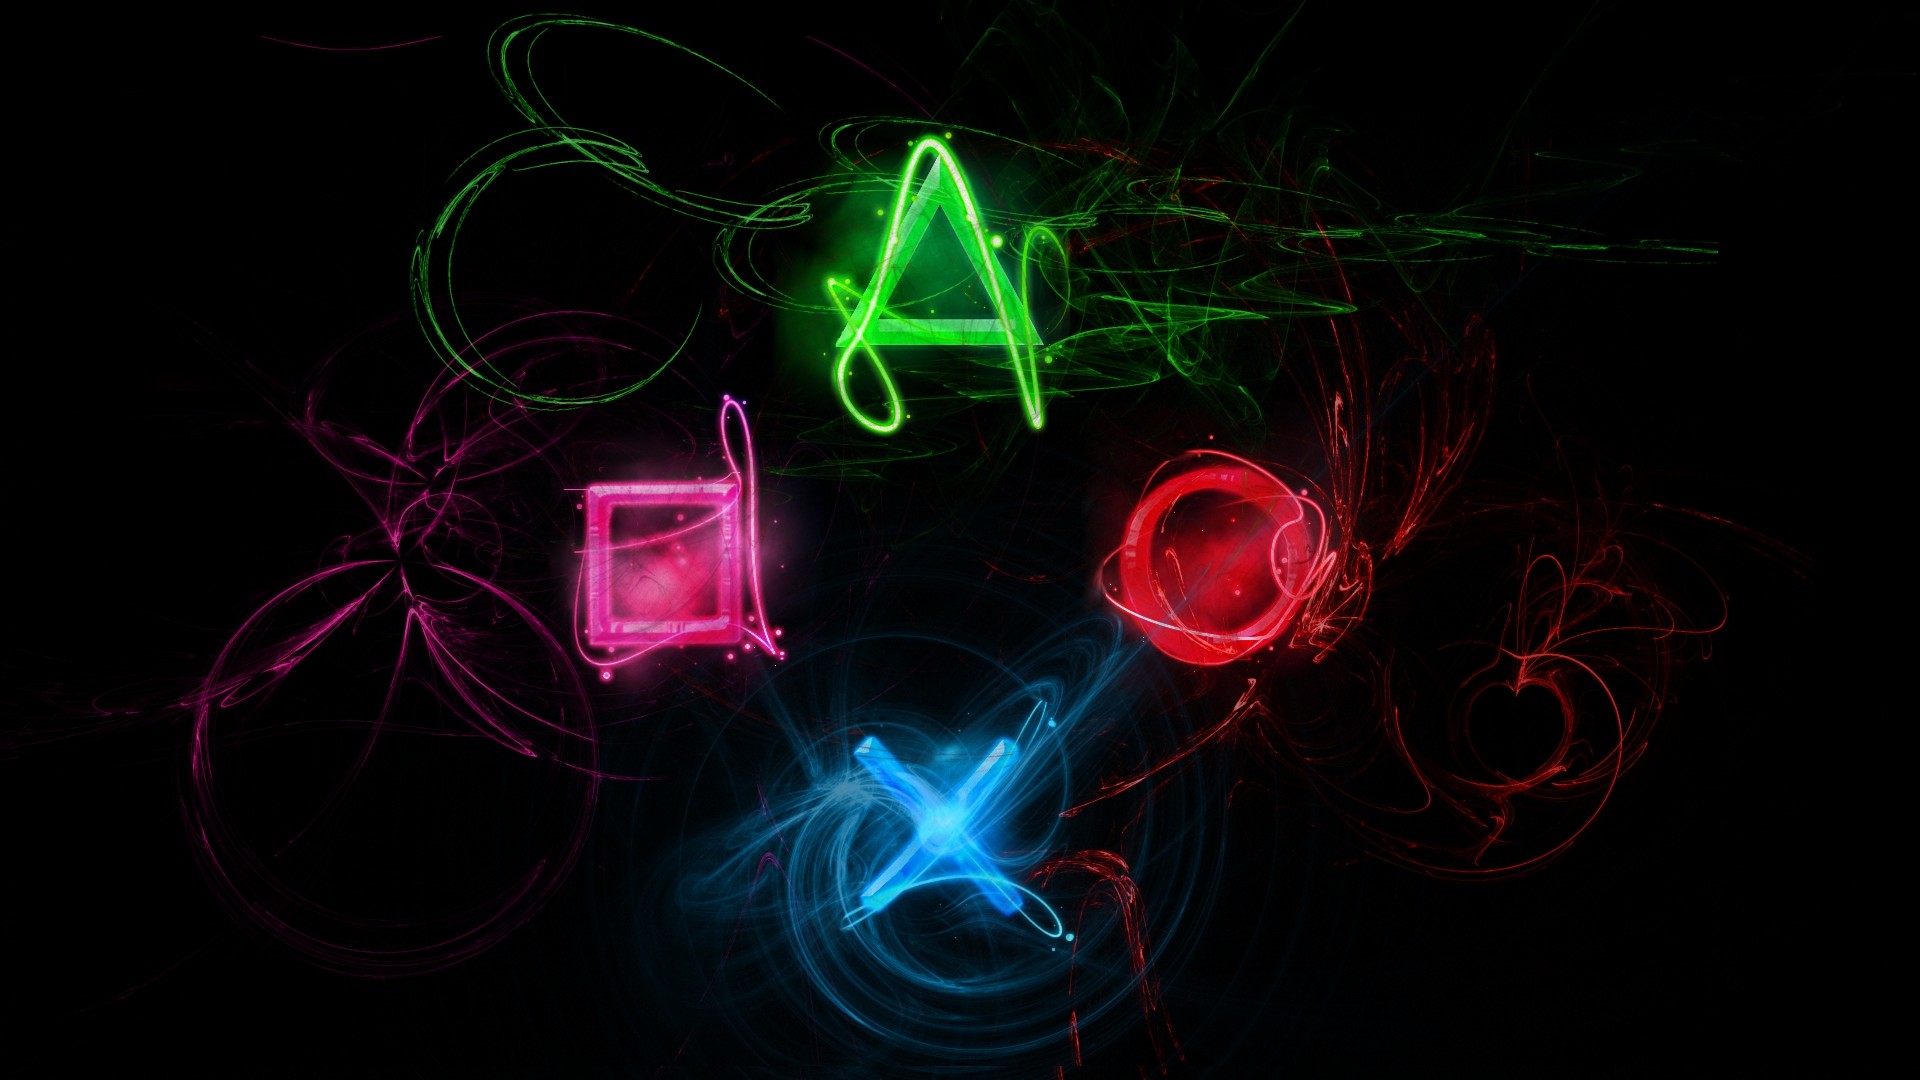 Cool PS3 Backgrounds (65+ images)